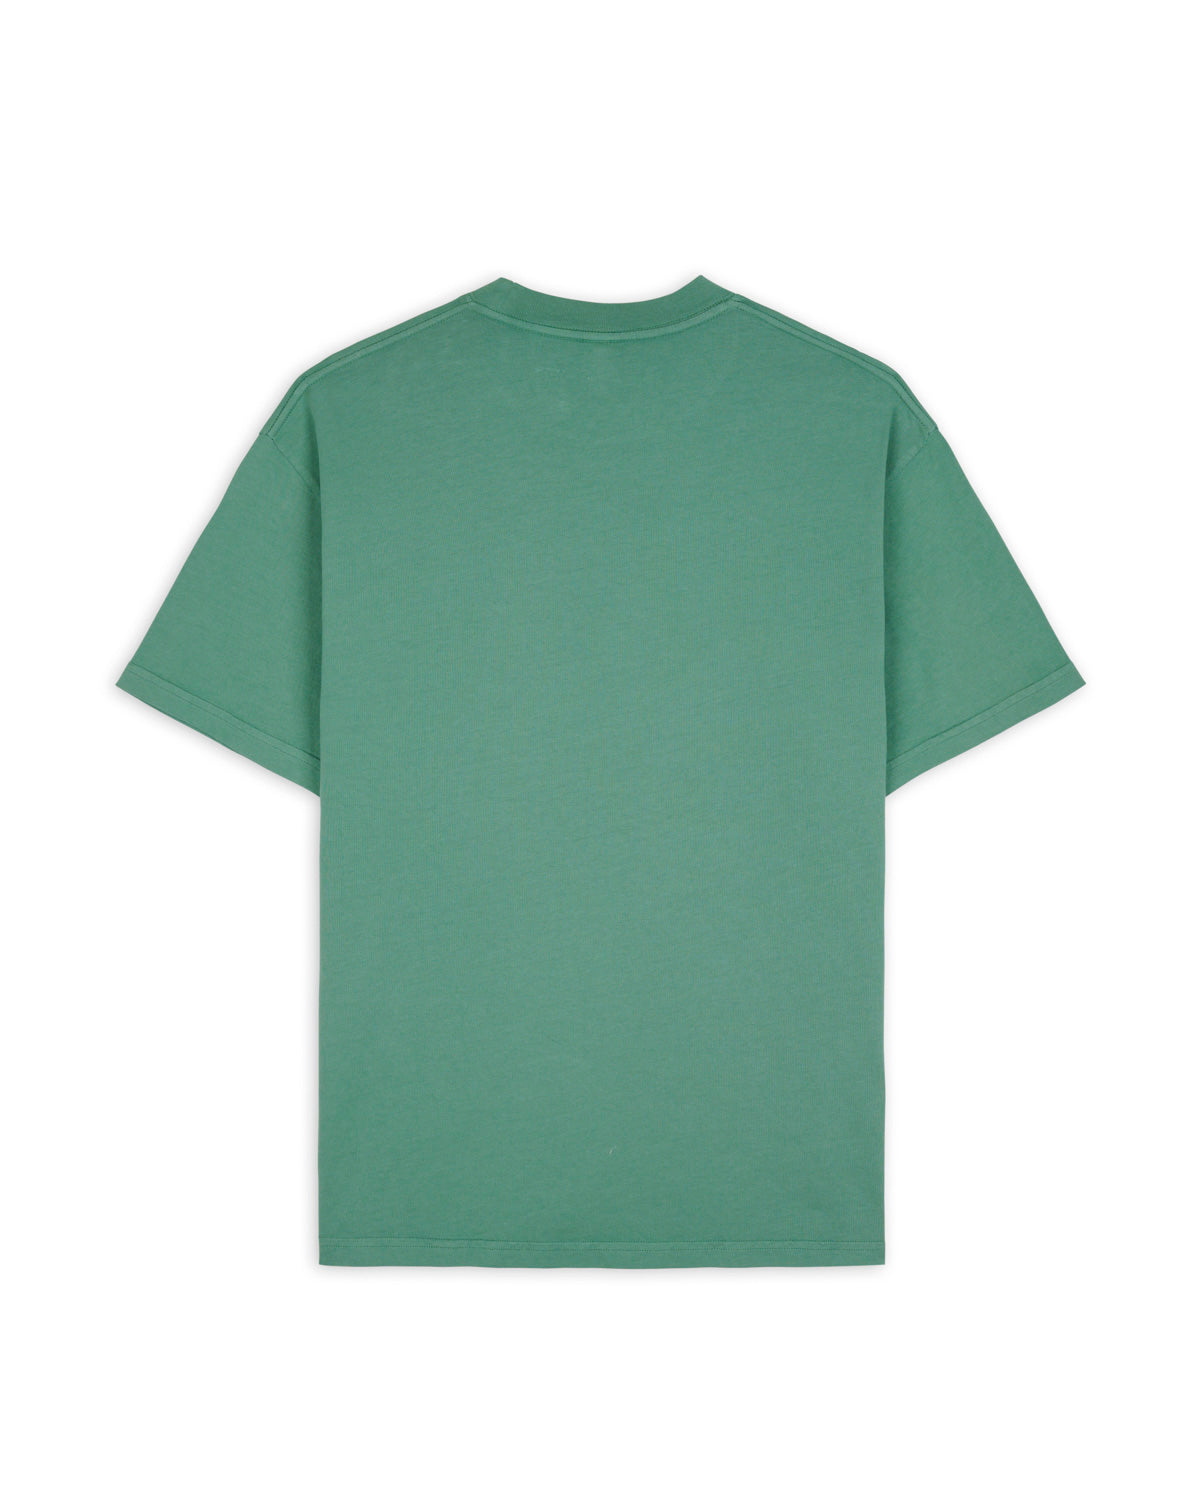 New Reality T-shirt - Green 2